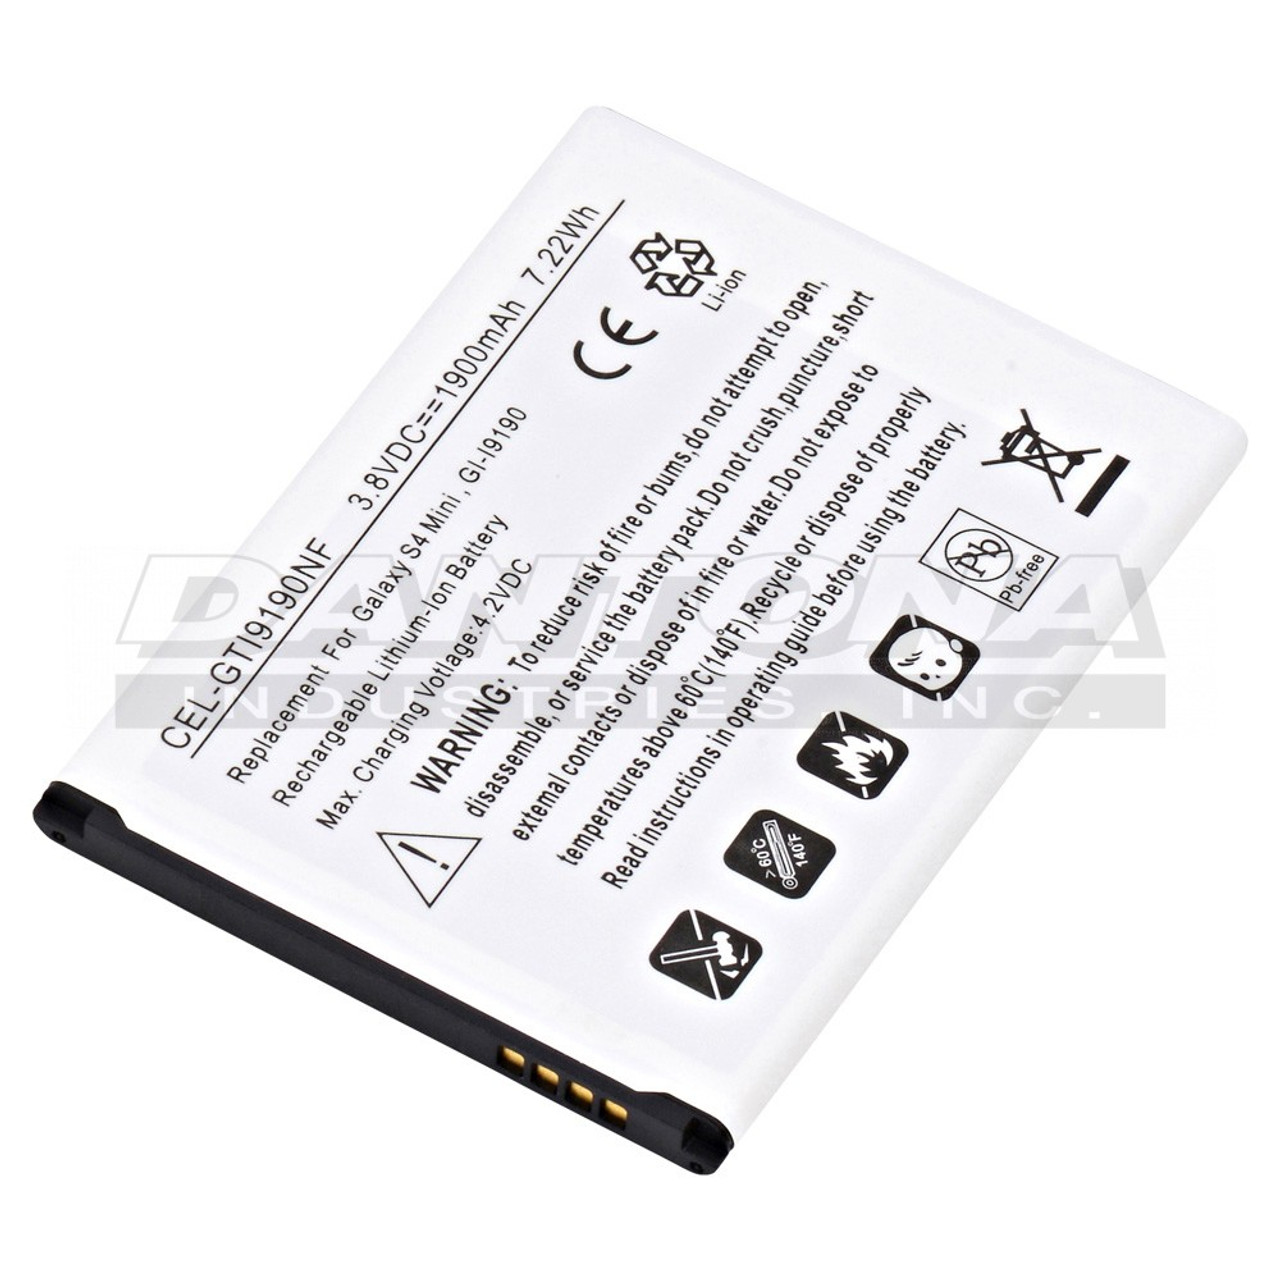 SAMSUNG GALAXY S4 MINI GT-i9190 REPLACEMENT BATTERY